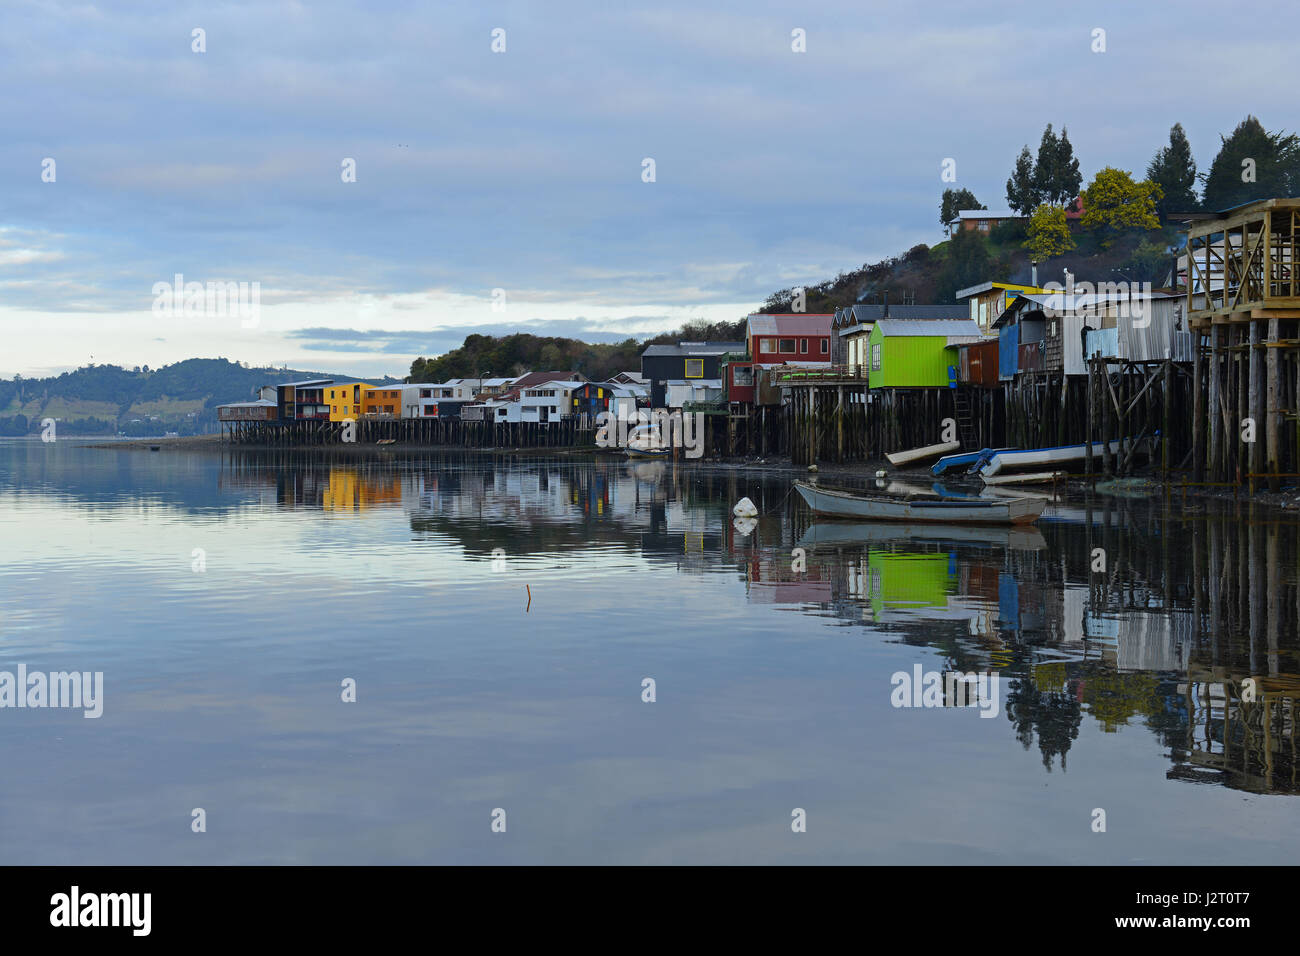 Skyline of Castro city with its famous stilt houses (palafitos) on Chiloe island in the lake district of Chile. Stock Photo